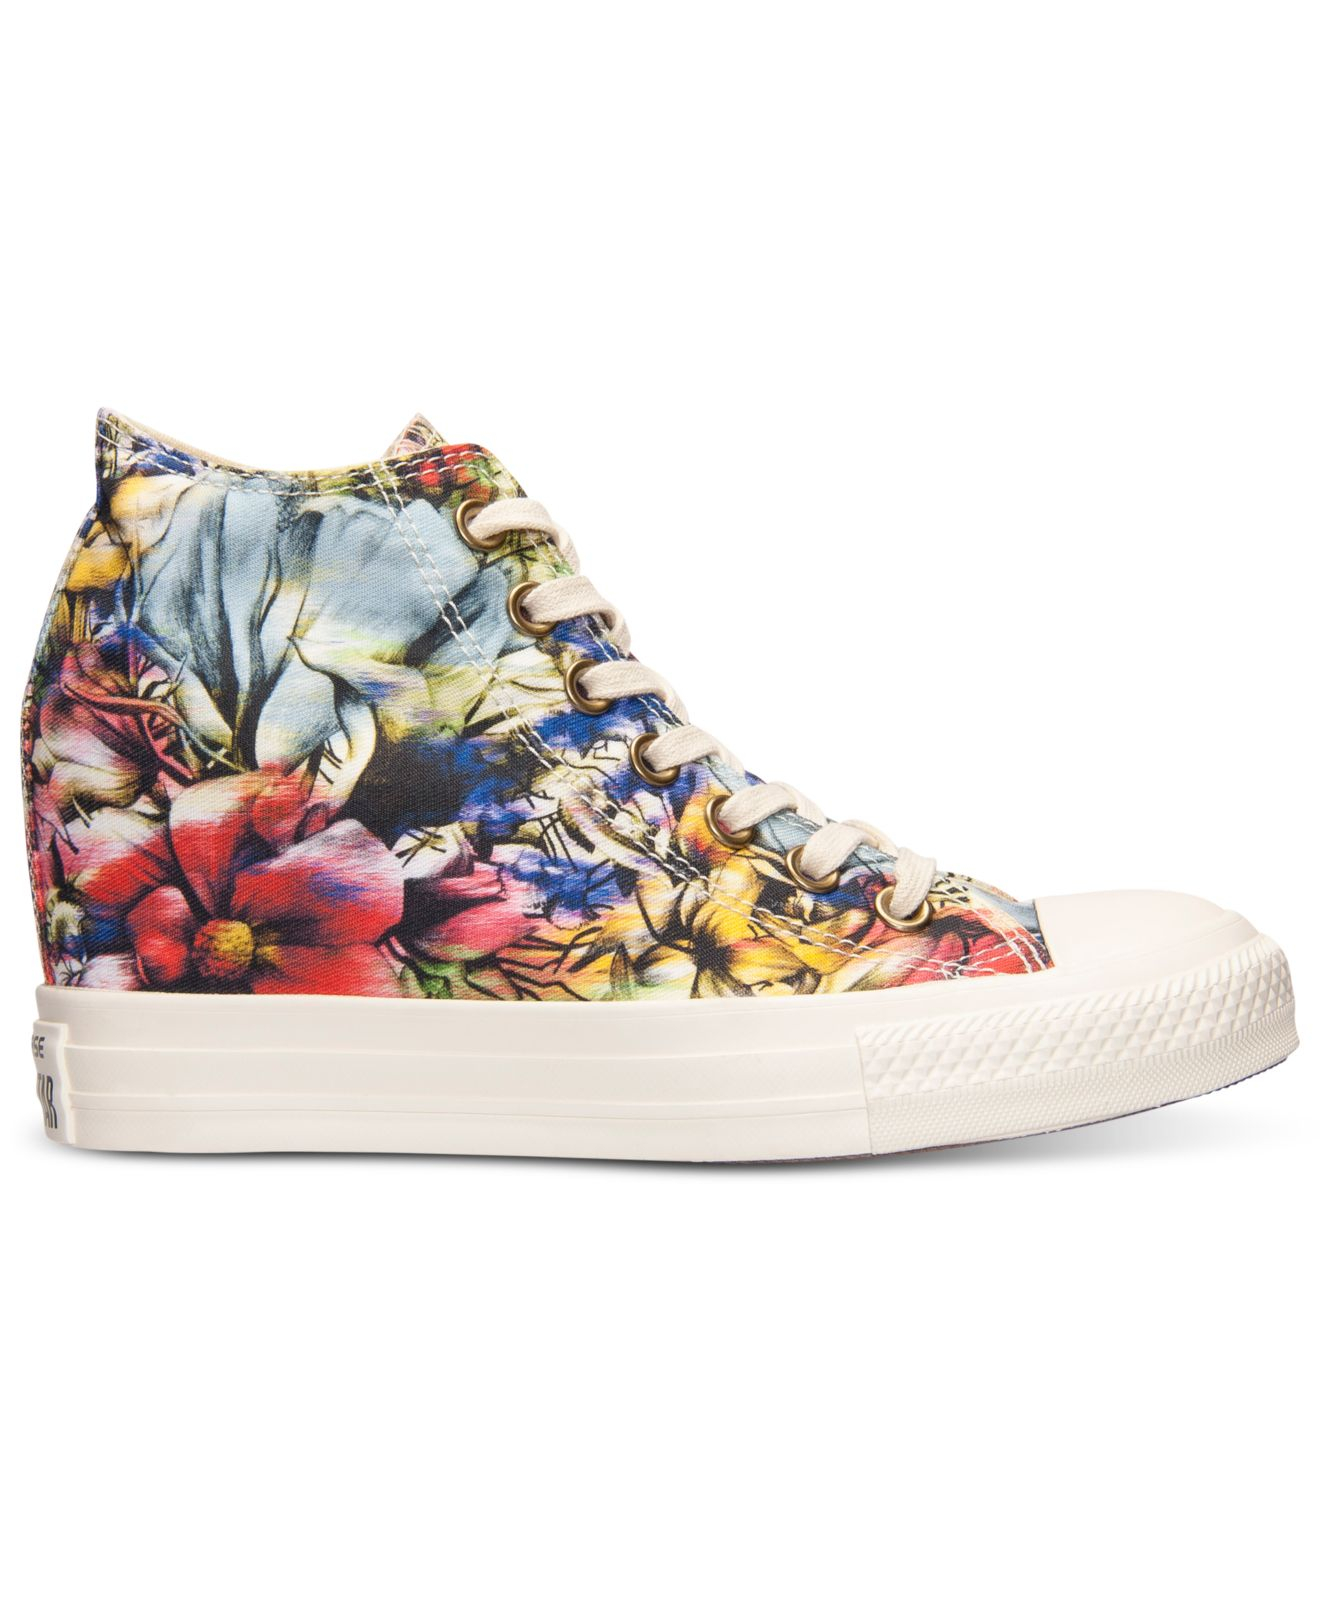 Lyst - Converse Women'S Chuck Taylor Platform Lux Casual Sneakers From ...